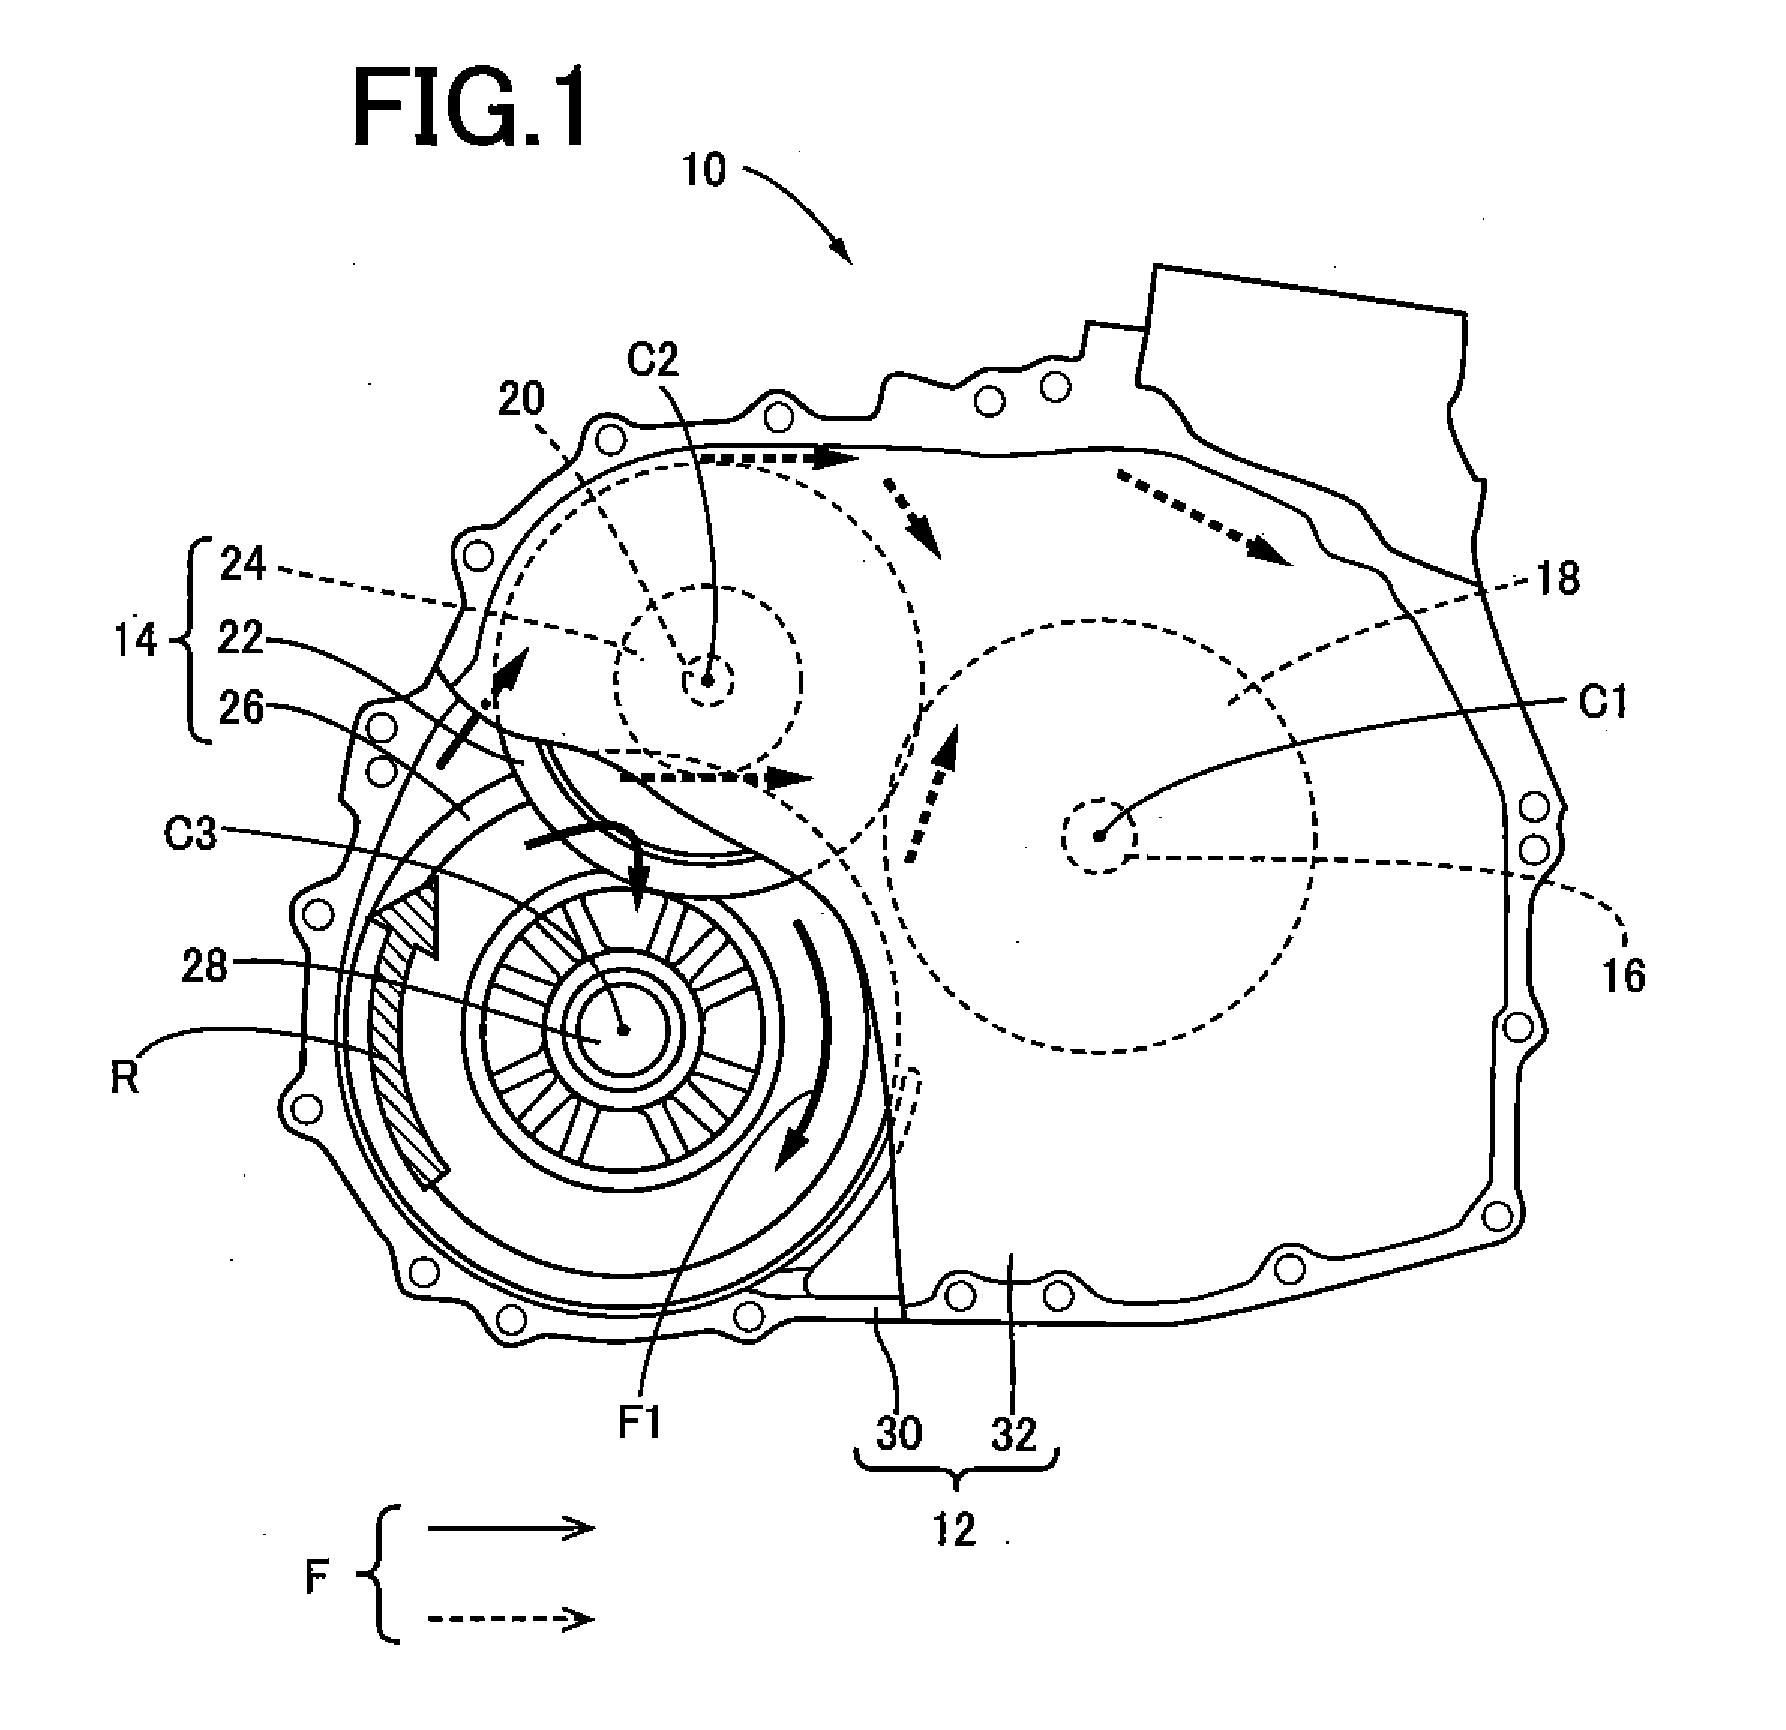 Sealing structure using a liquid gasket